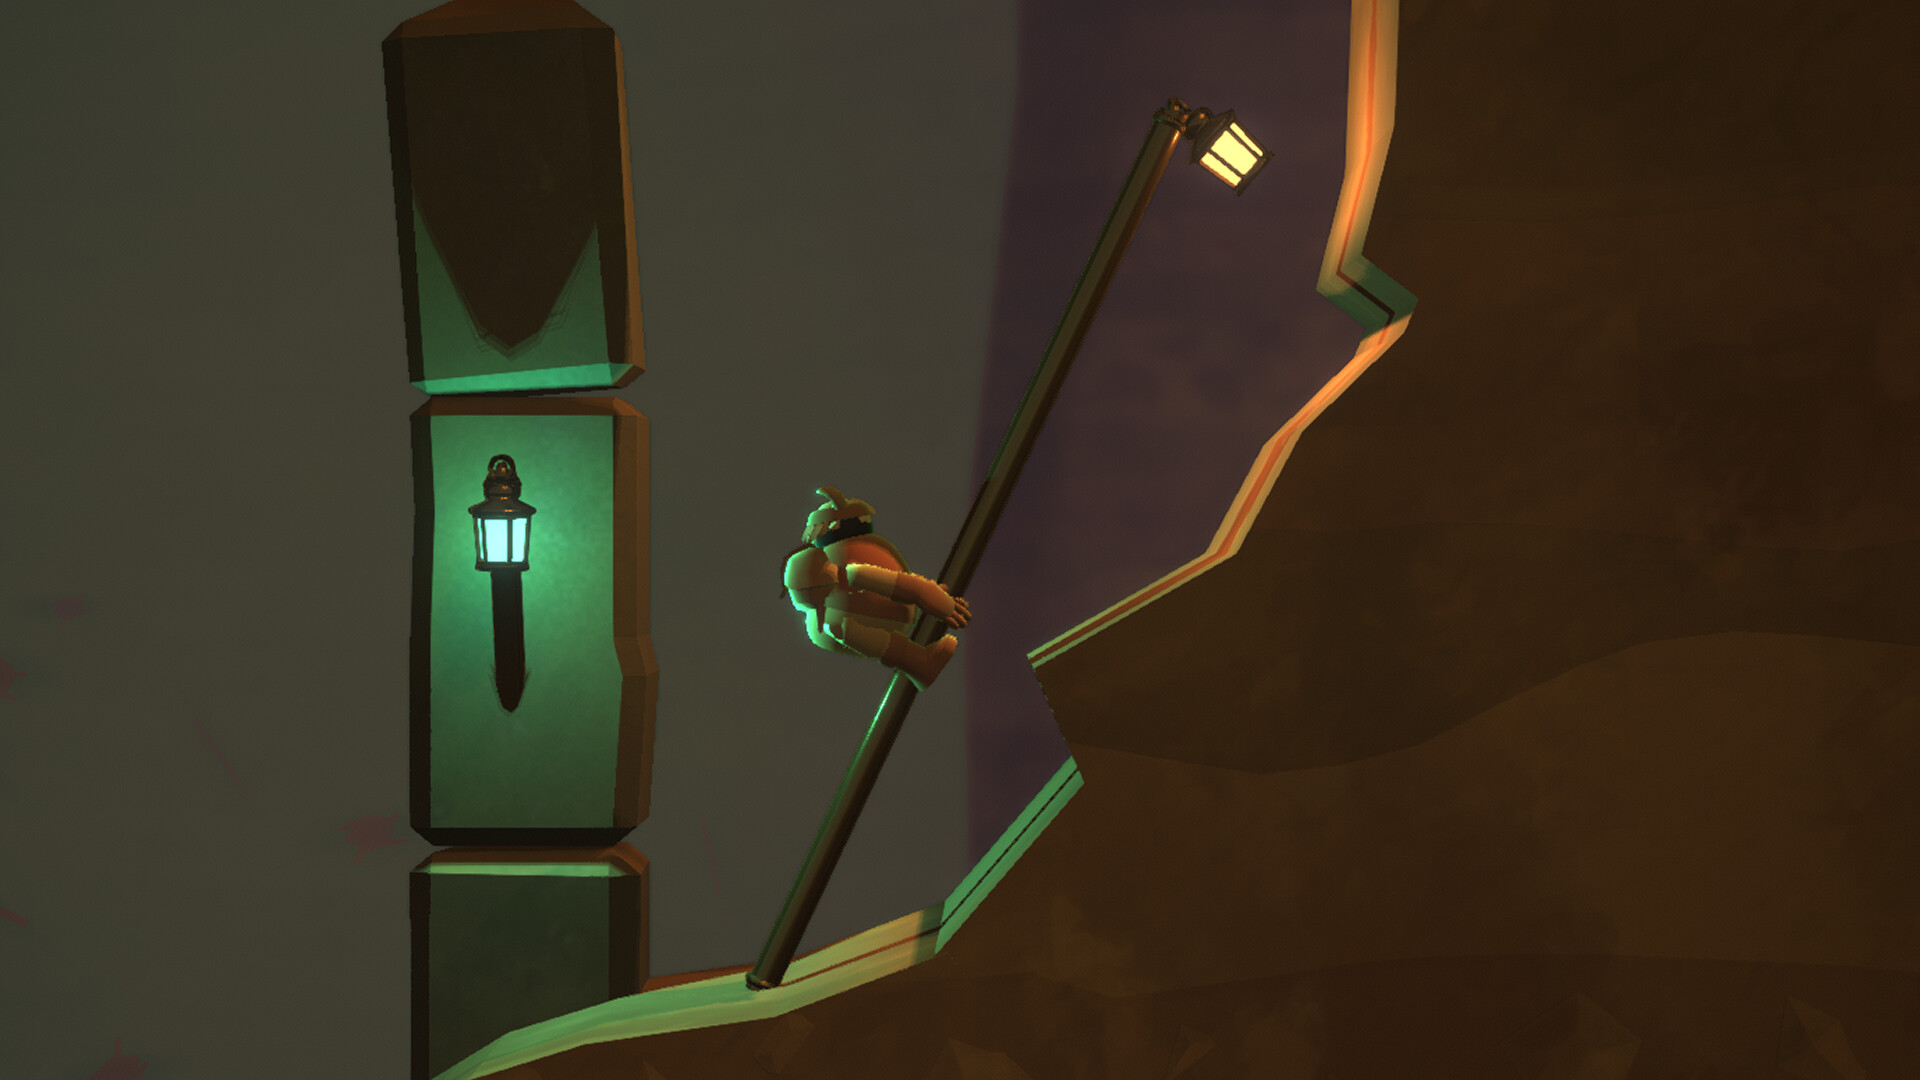 A difficult game about climbing на телефон. A difficult game about Climbing.